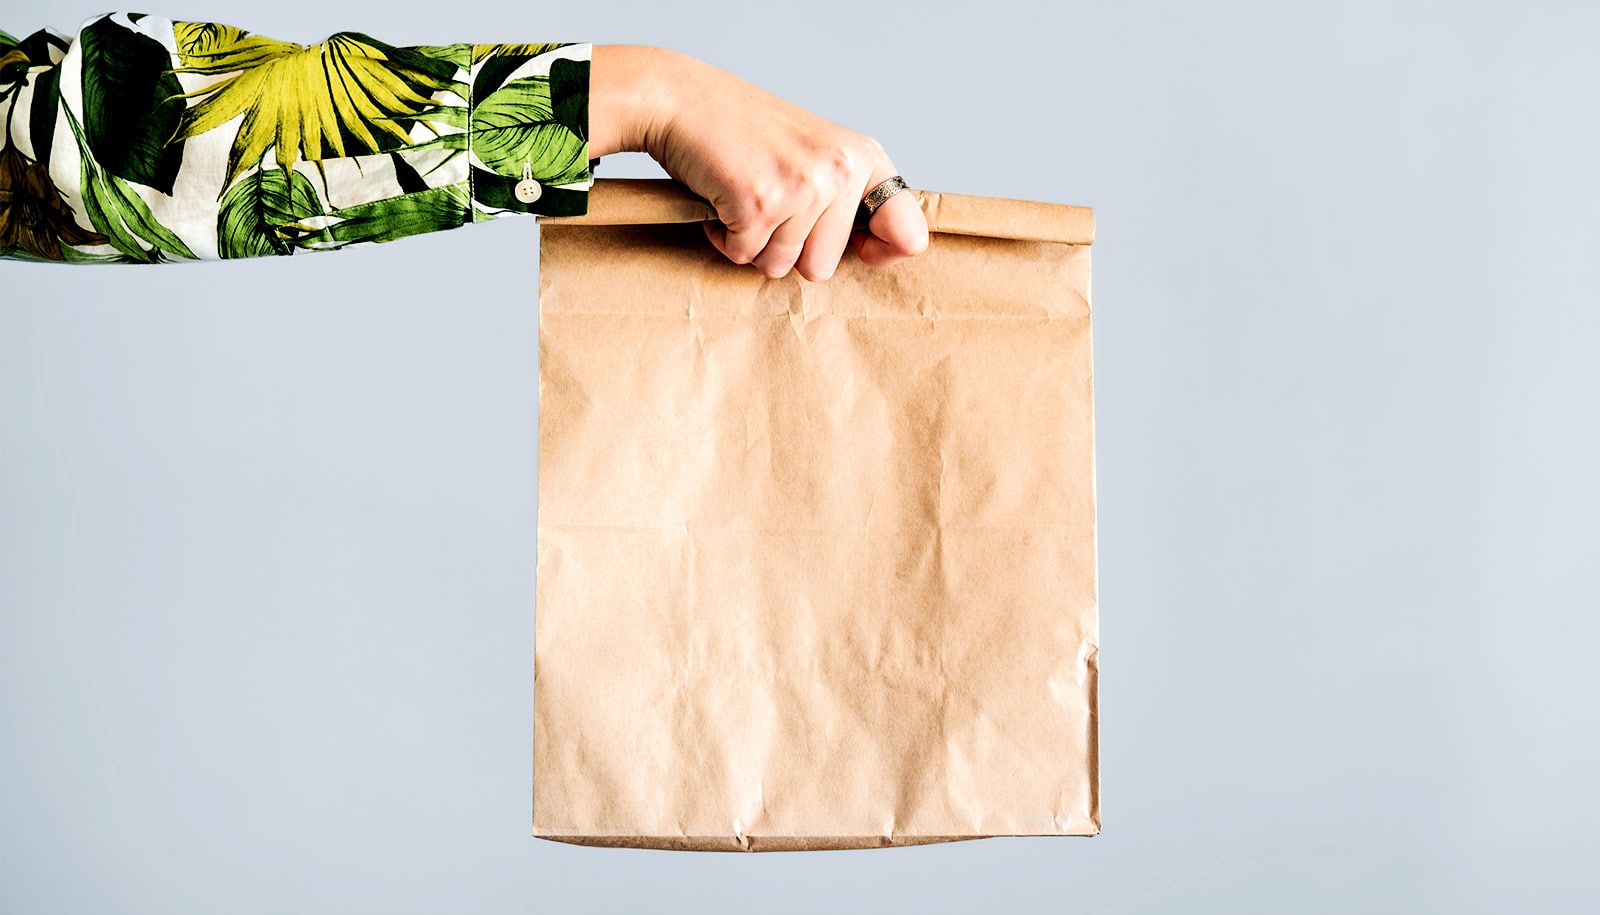 A person wearing a shirt with a leafy pattern on it holds a paper bag.